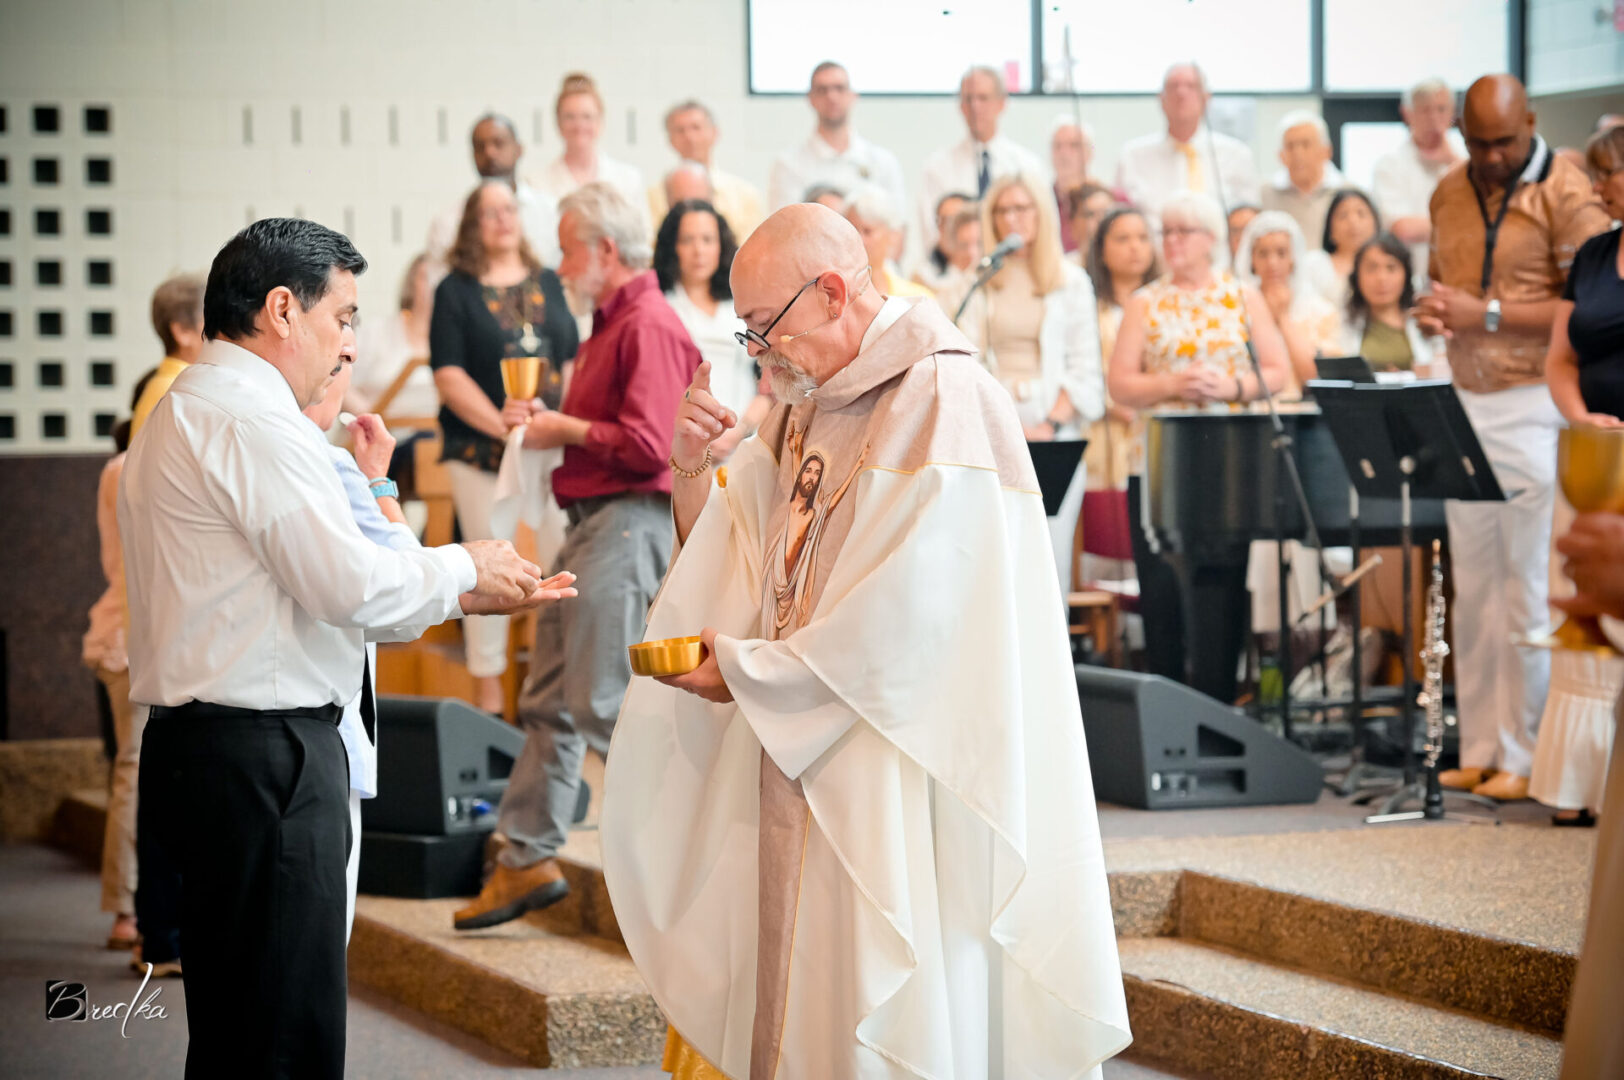 Man receiving communion from priest in church.